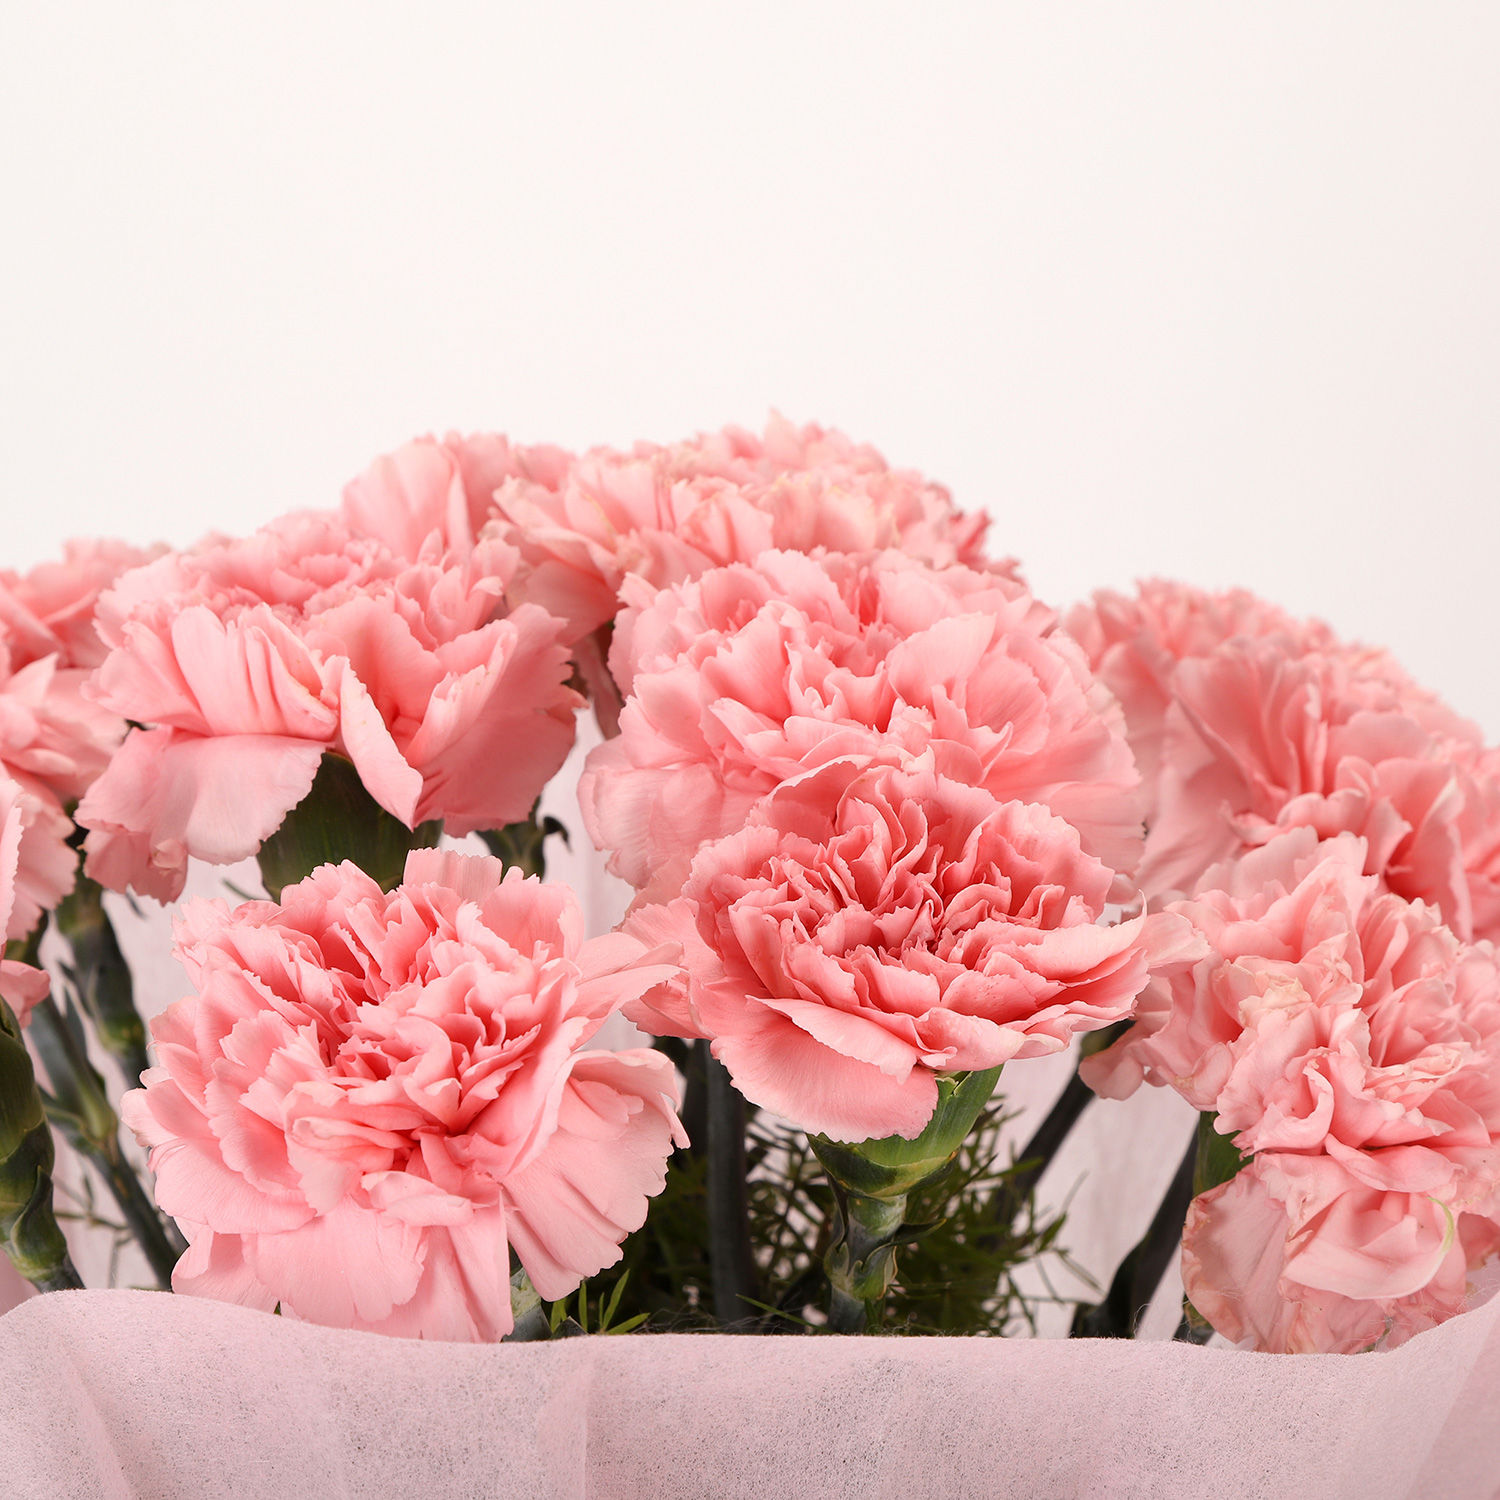 Online Pink Pretty Carnations Bouquet Gift Delivery In Singapore Fnp